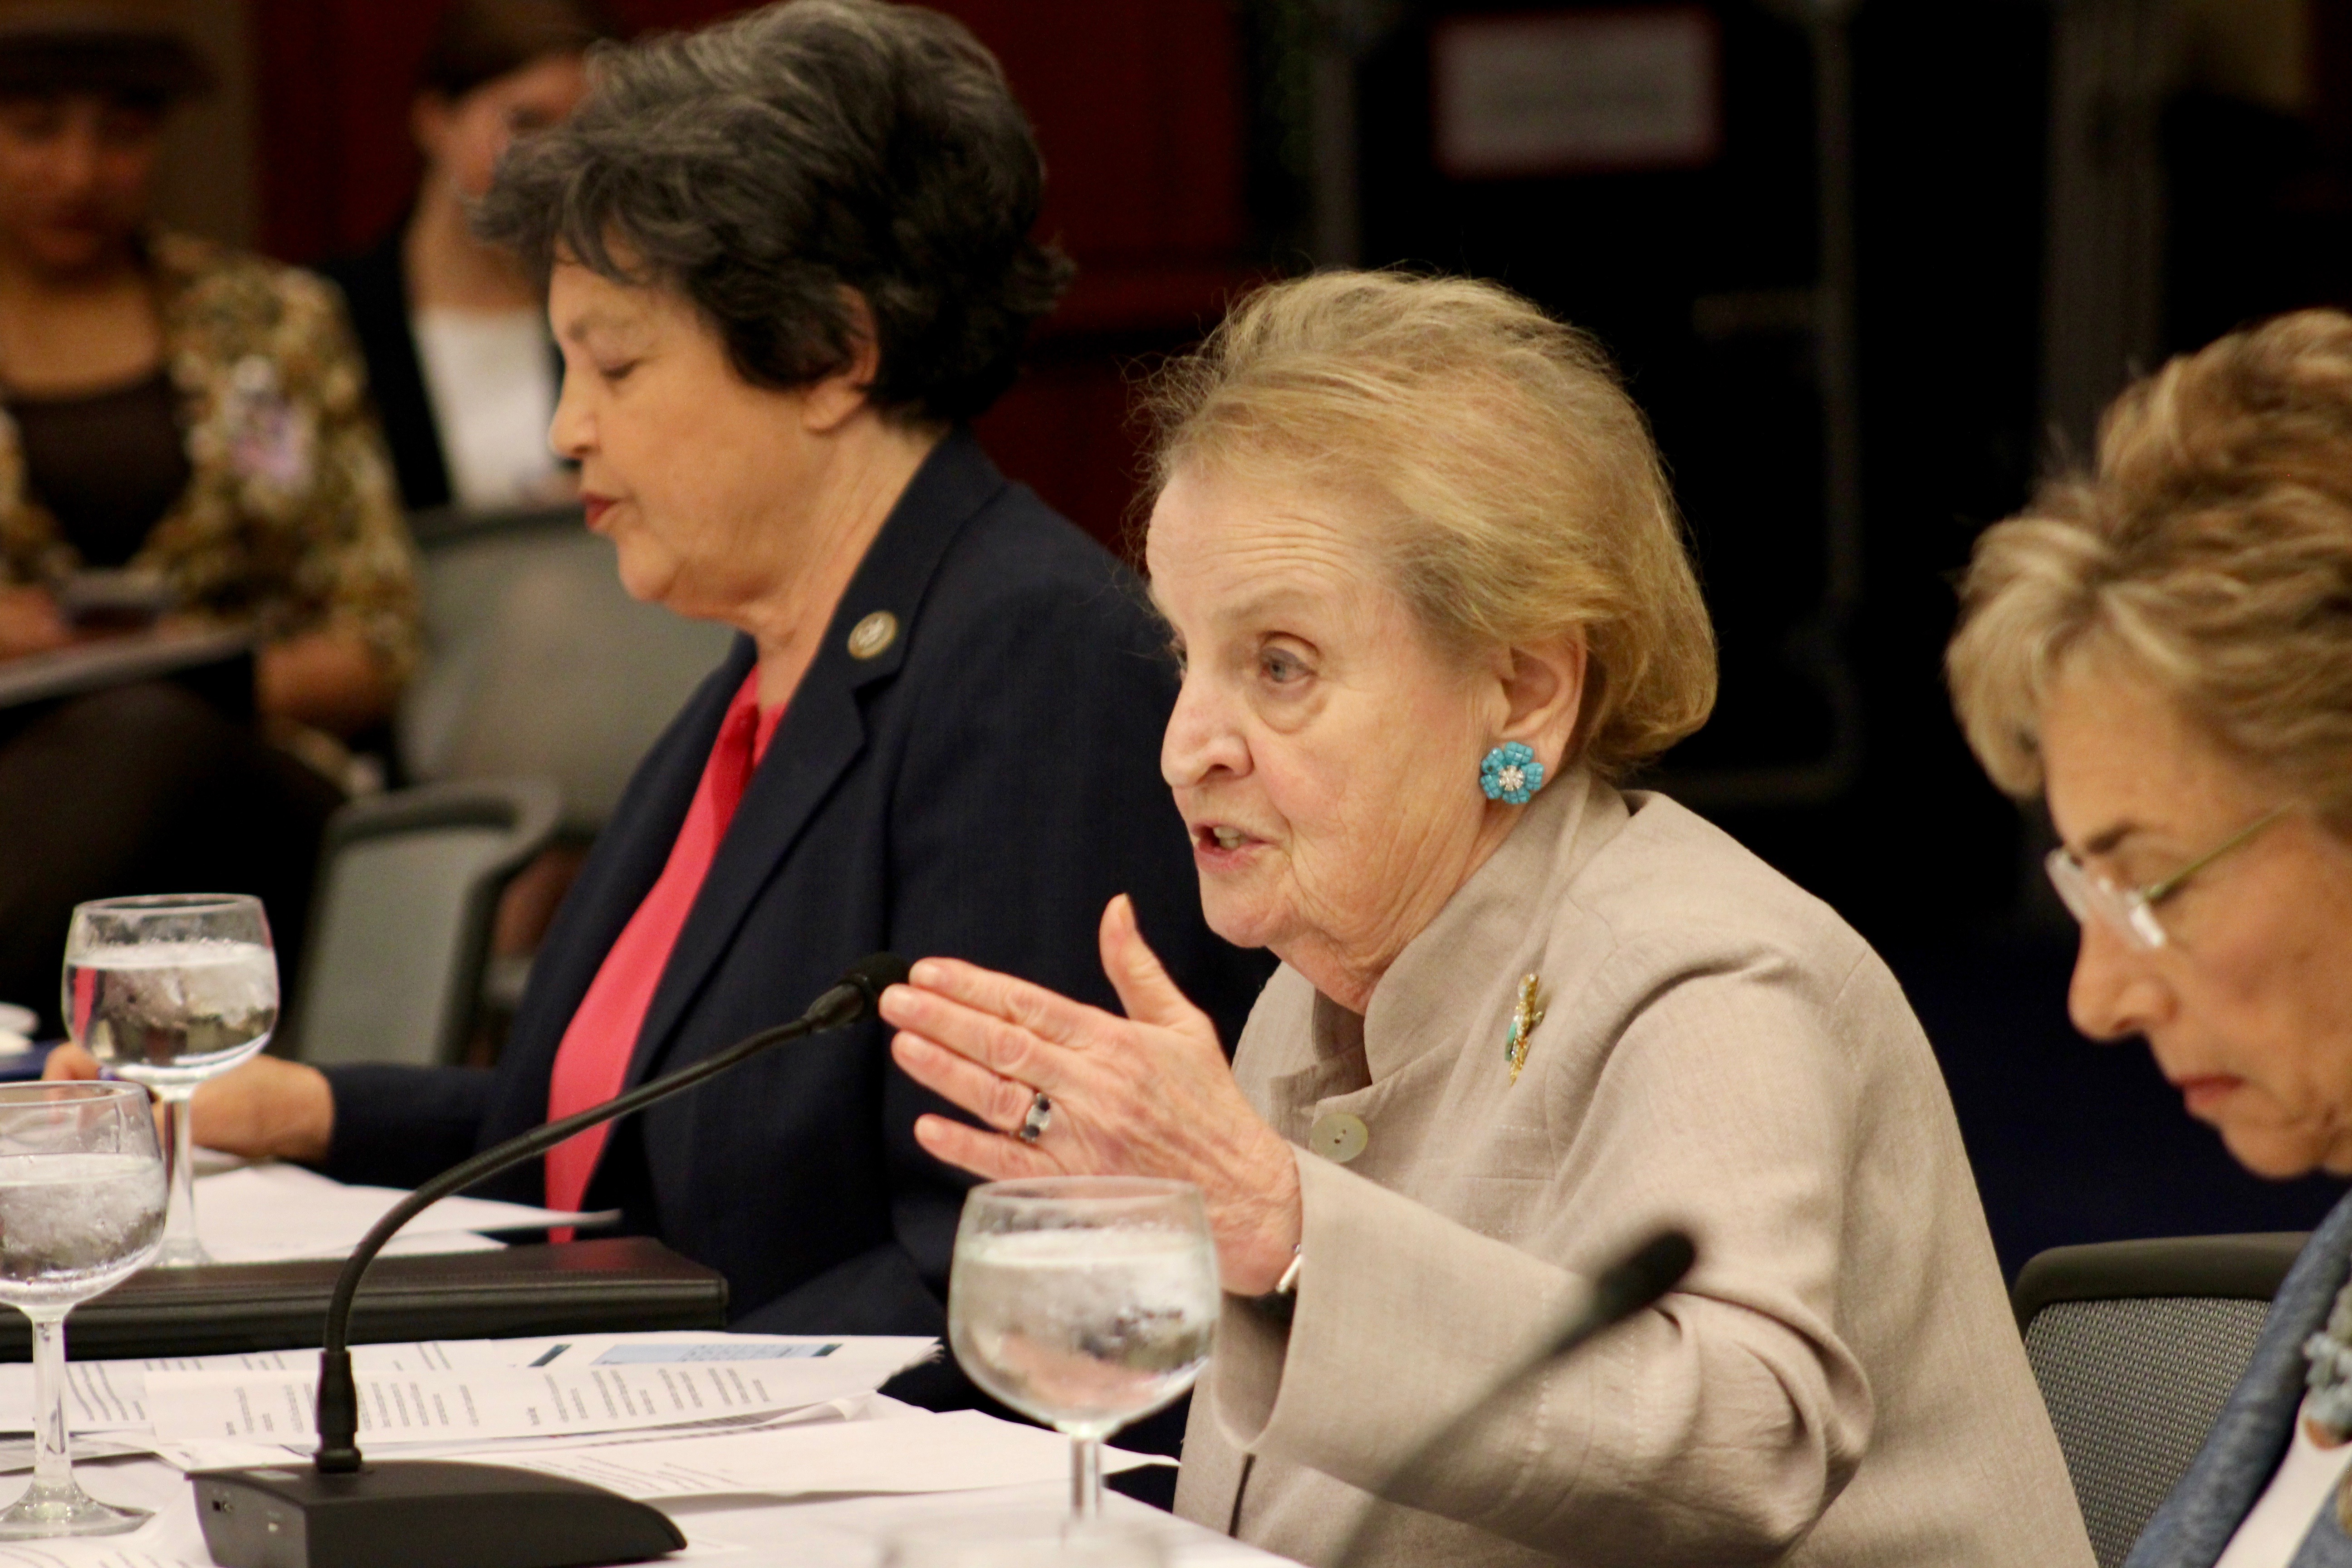 NDI Chairman and Former Secretary of State Madeleine K. Albright with Rep. Lois Frankel (FL) on the left and Rep. Jan Schakowsky (IL) on the right.